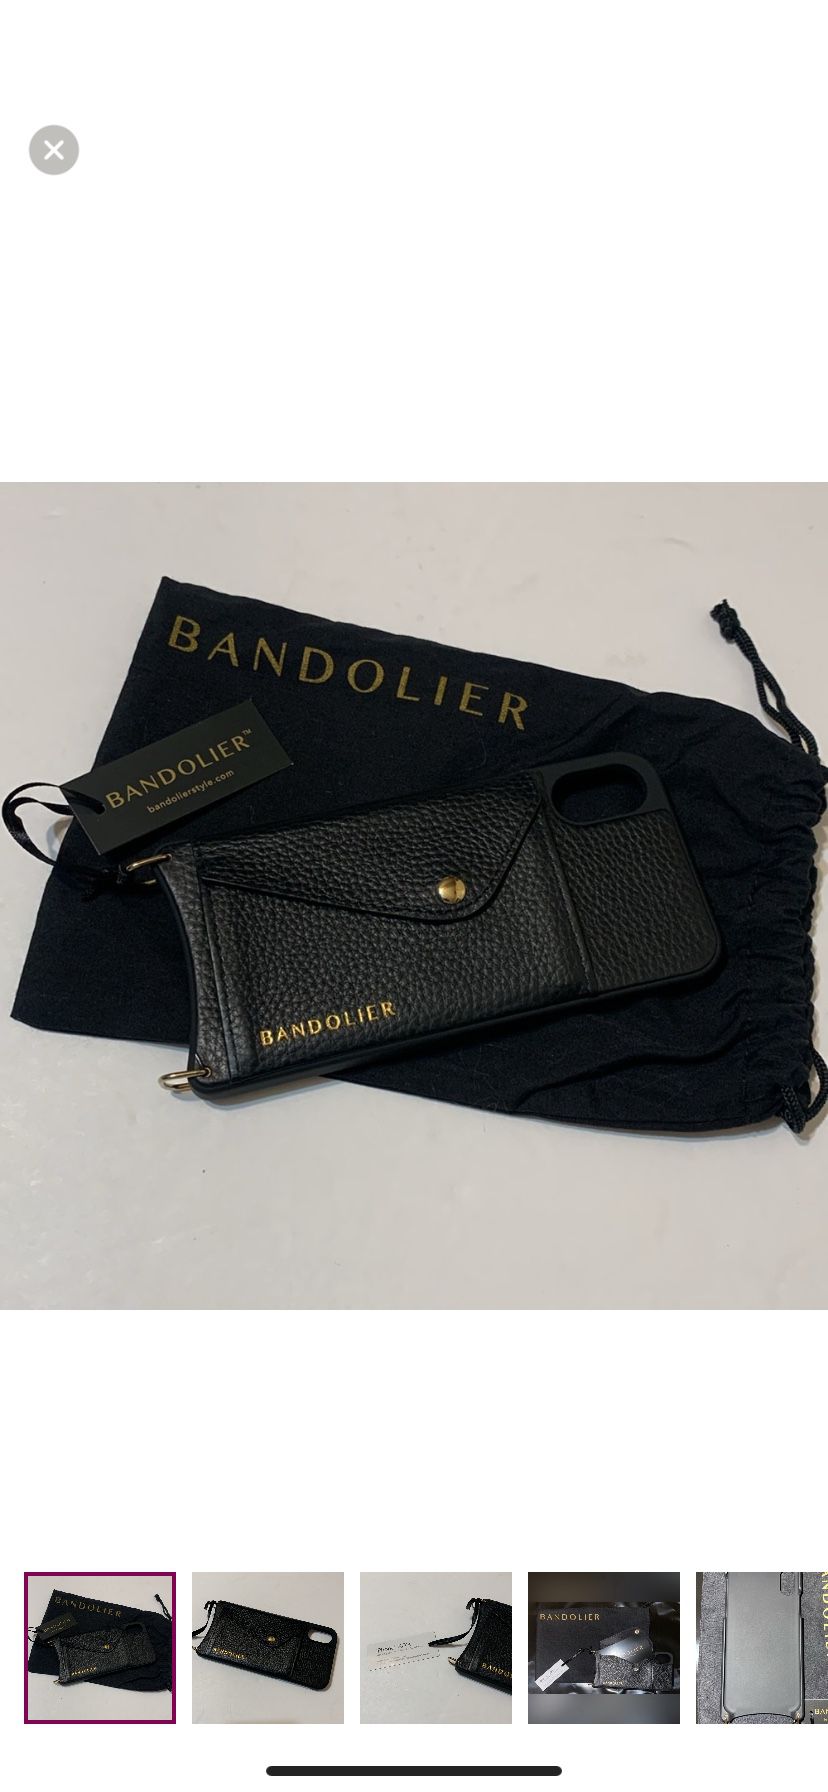 NEW Bandolier Black iPhone X/XS case with Tag.  Brand new never used.